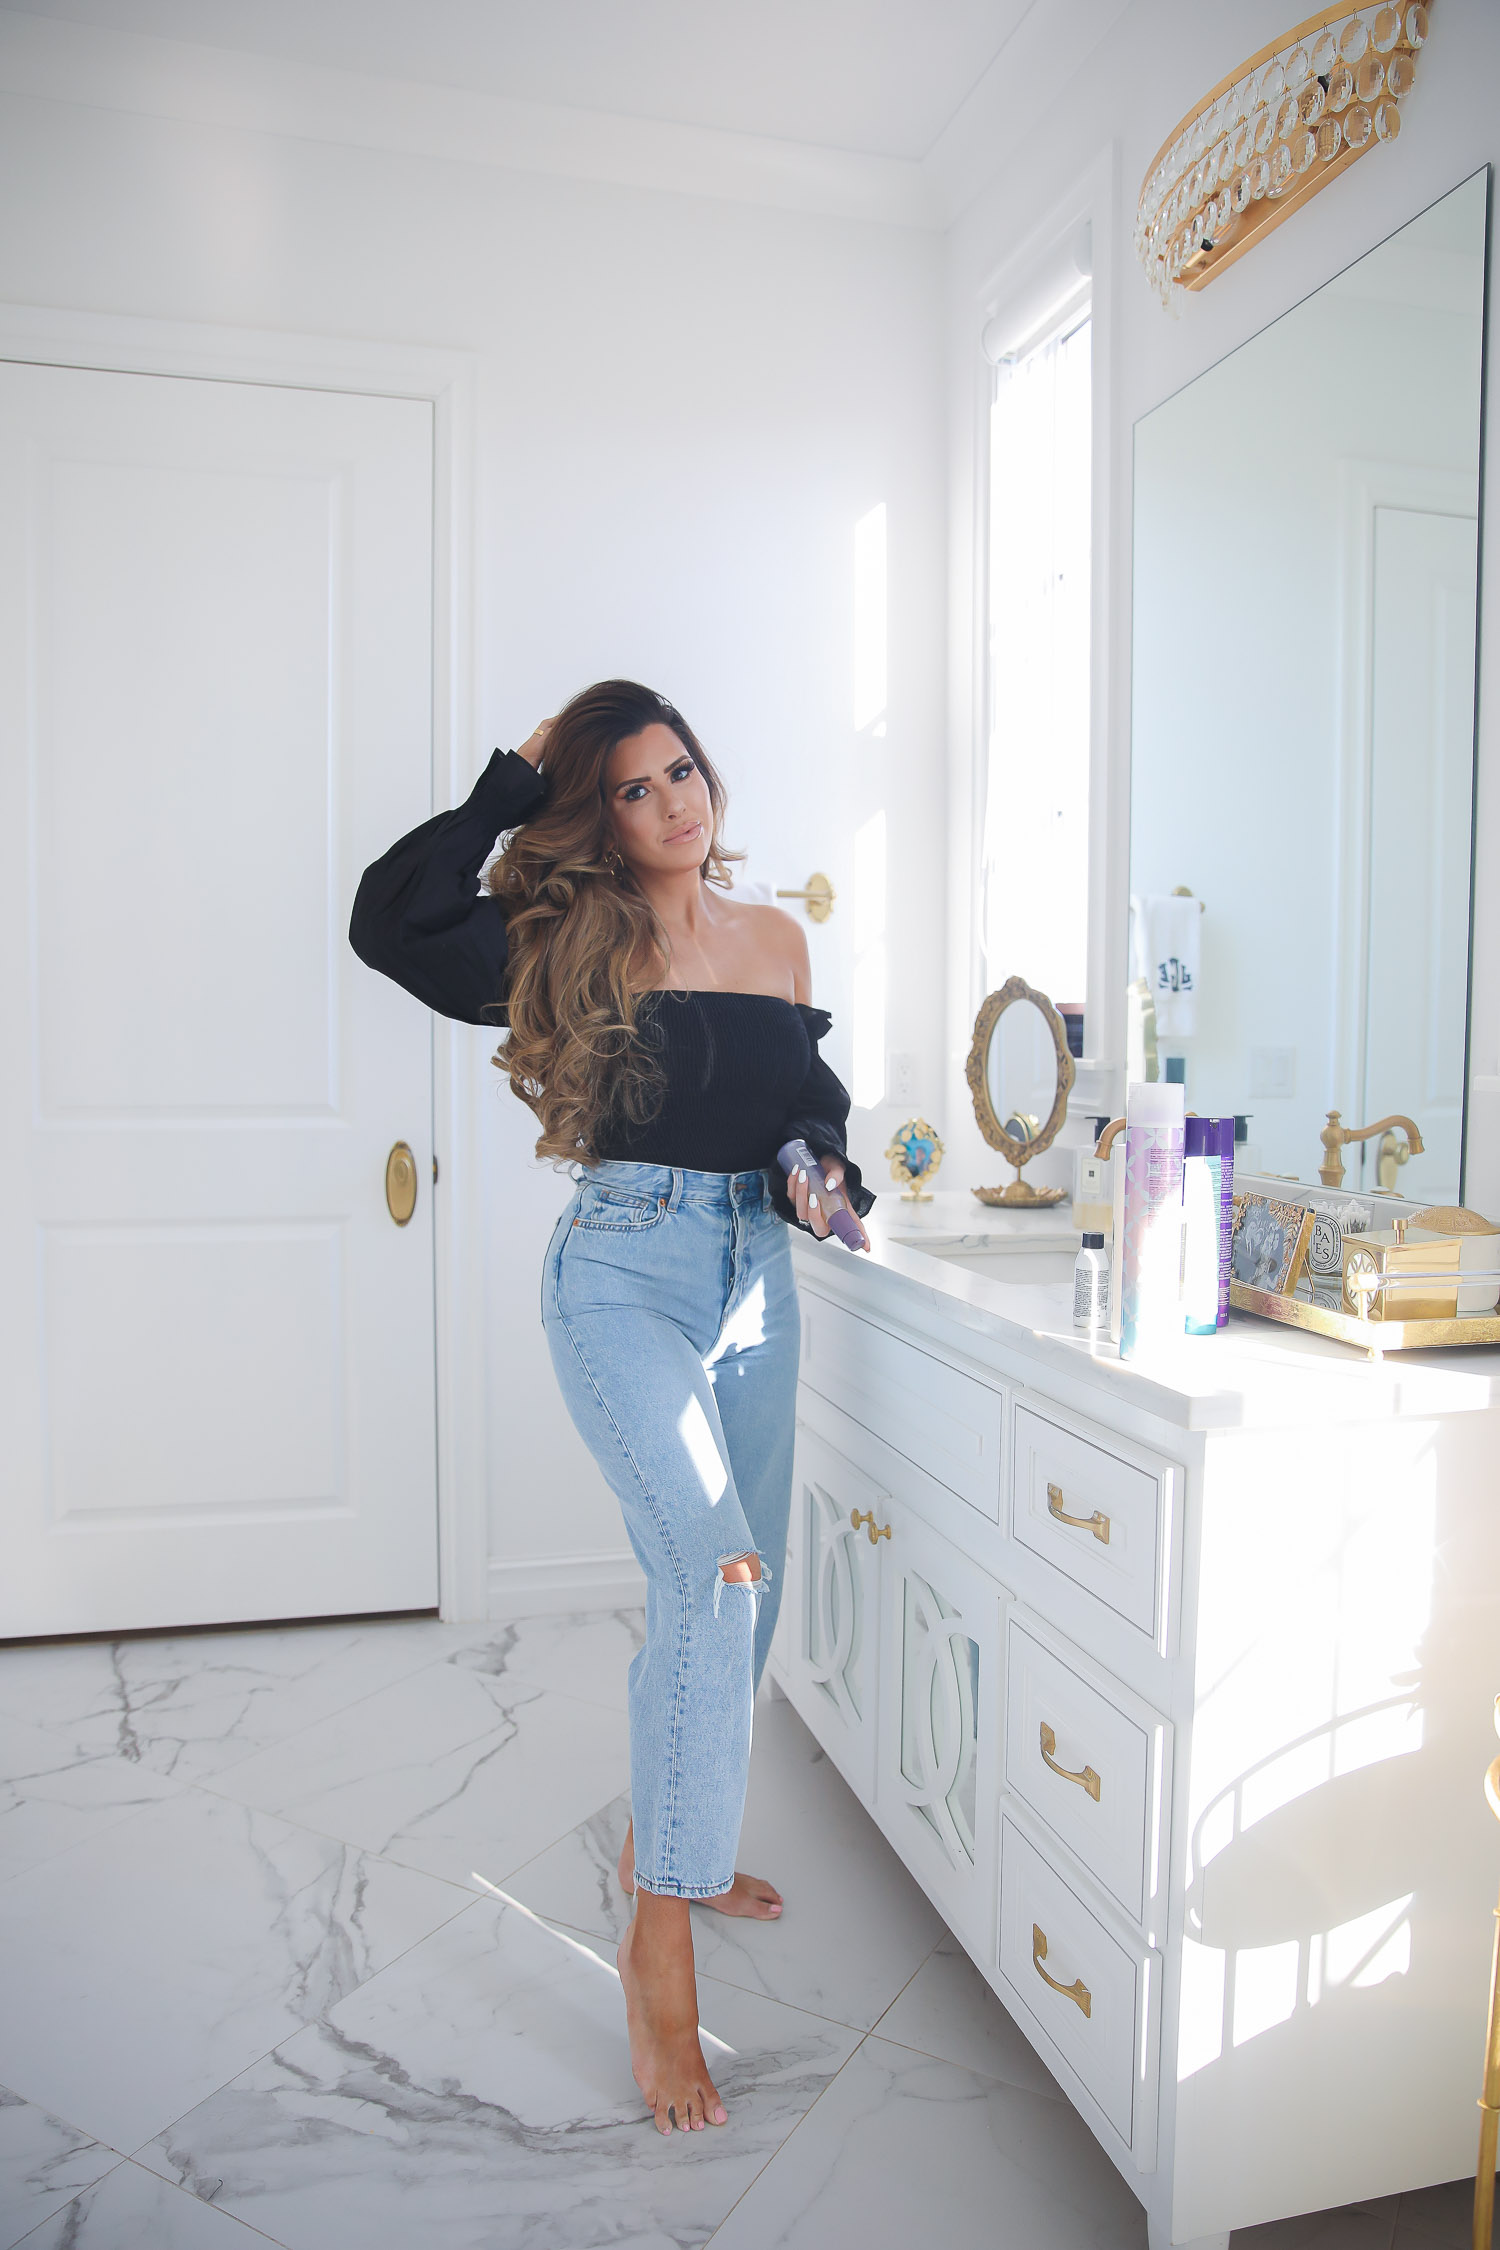 hair dot com, best hair products for long hair and extensions, Purology shampoo and conditioner, emily gemma, the sweetest thing blog |Instagram Recap by popular US fashion blog, The Sweetest Thing: image of Emily Gemma wearing a black NastyGal off the shoulder top and light wash high waist denim jeans. 